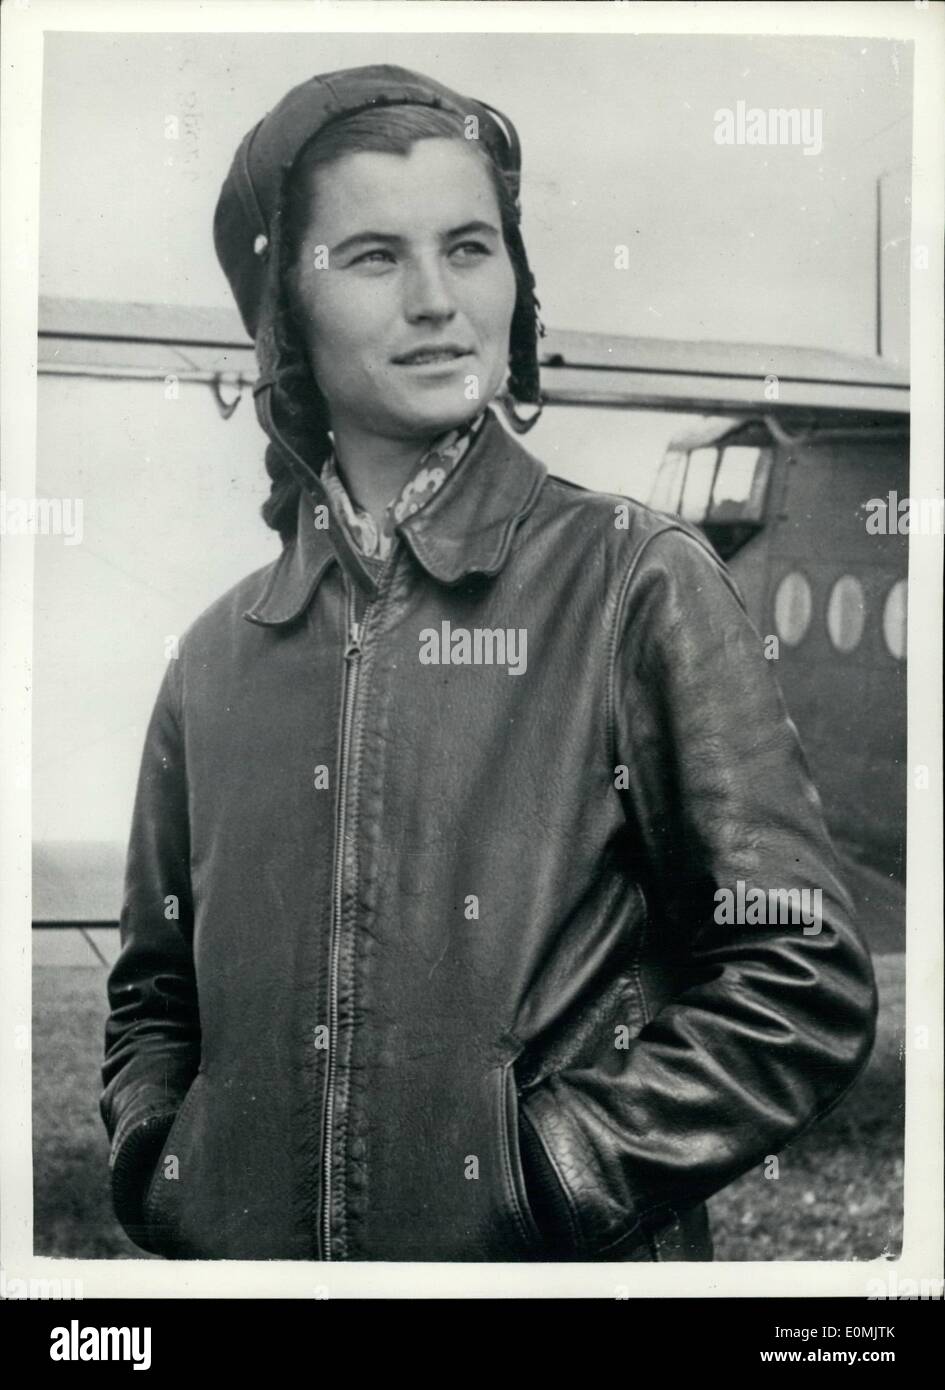 Sep. 09, 1955 - New Records Set Up In USSR. Parachute Contests. ''Master Of Sport''.: The 8th. U.S.R.R. Parachute Contest was concluded recently at Tushino aerodome, near Moscow. A number of new world records were set up. Photo shows A. Sullanova - a Soviet woman ''Master of Sport'' who broke national and world records in two jumps from 660 yards - missing her target by an average of only 11 ft. Stock Photo